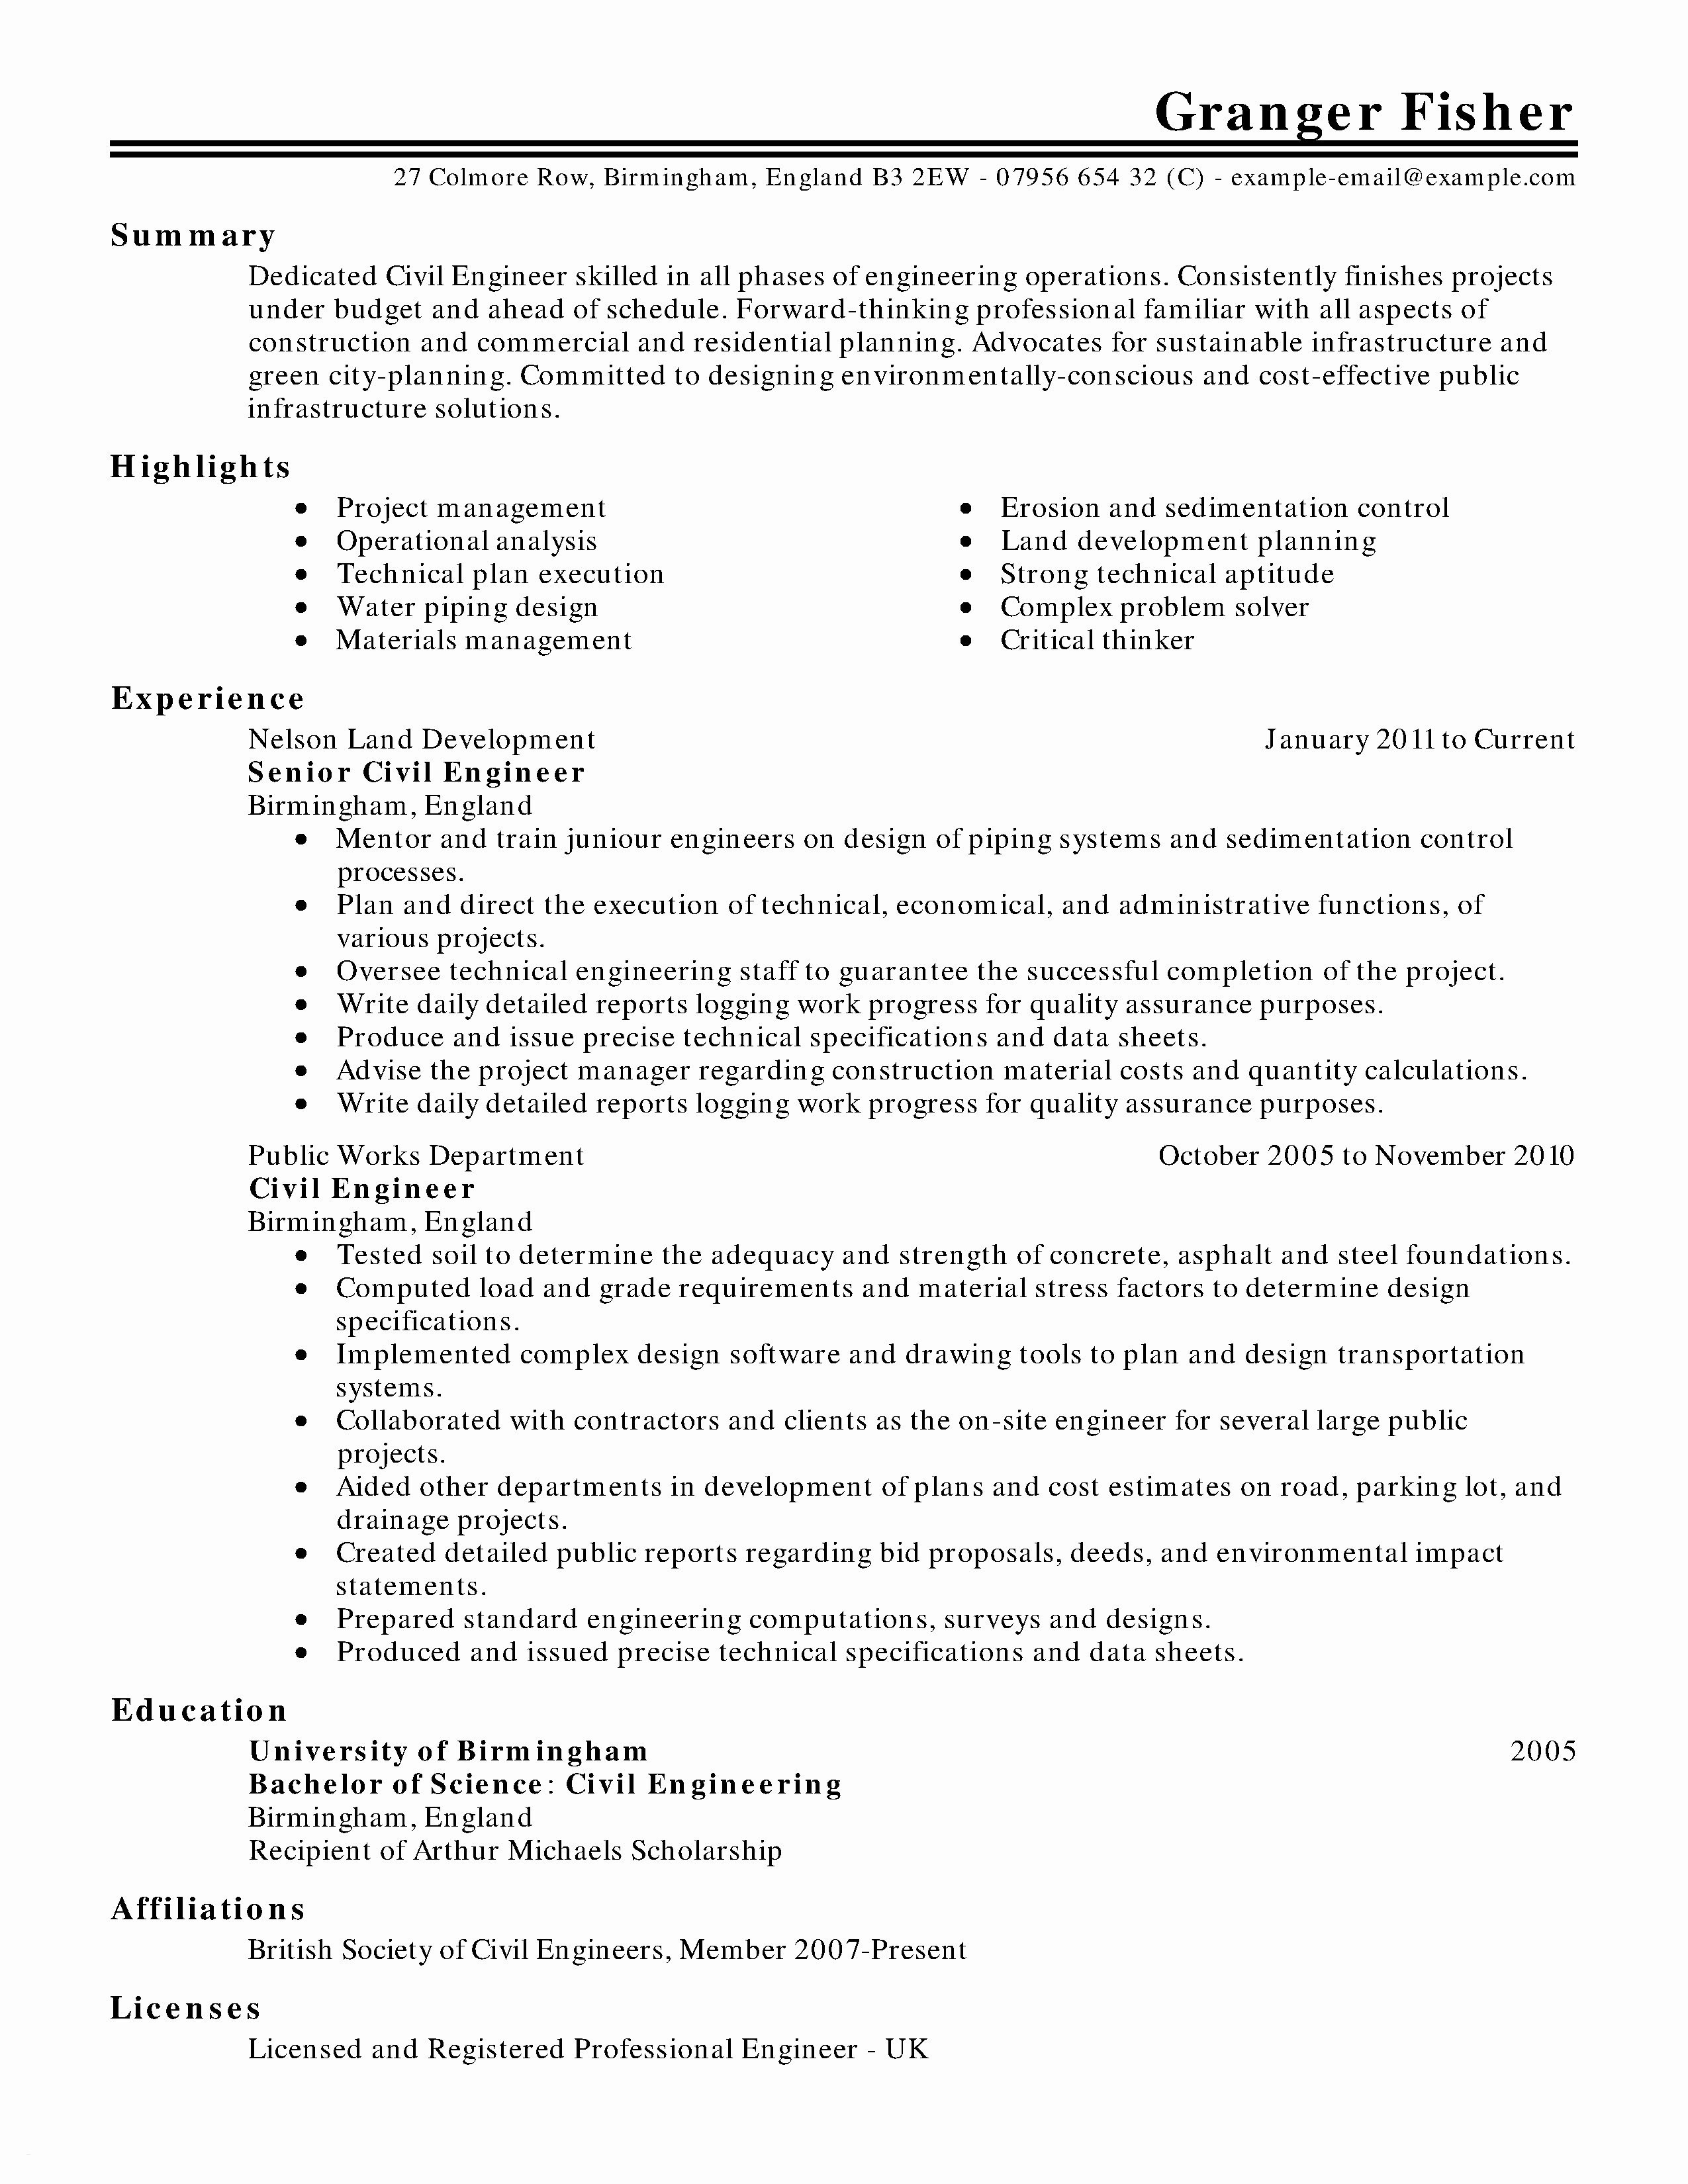 Mortgage Protection Letter Template - Job Letter for Mortgage Inspirationa Fill In Resume Unique New Cover